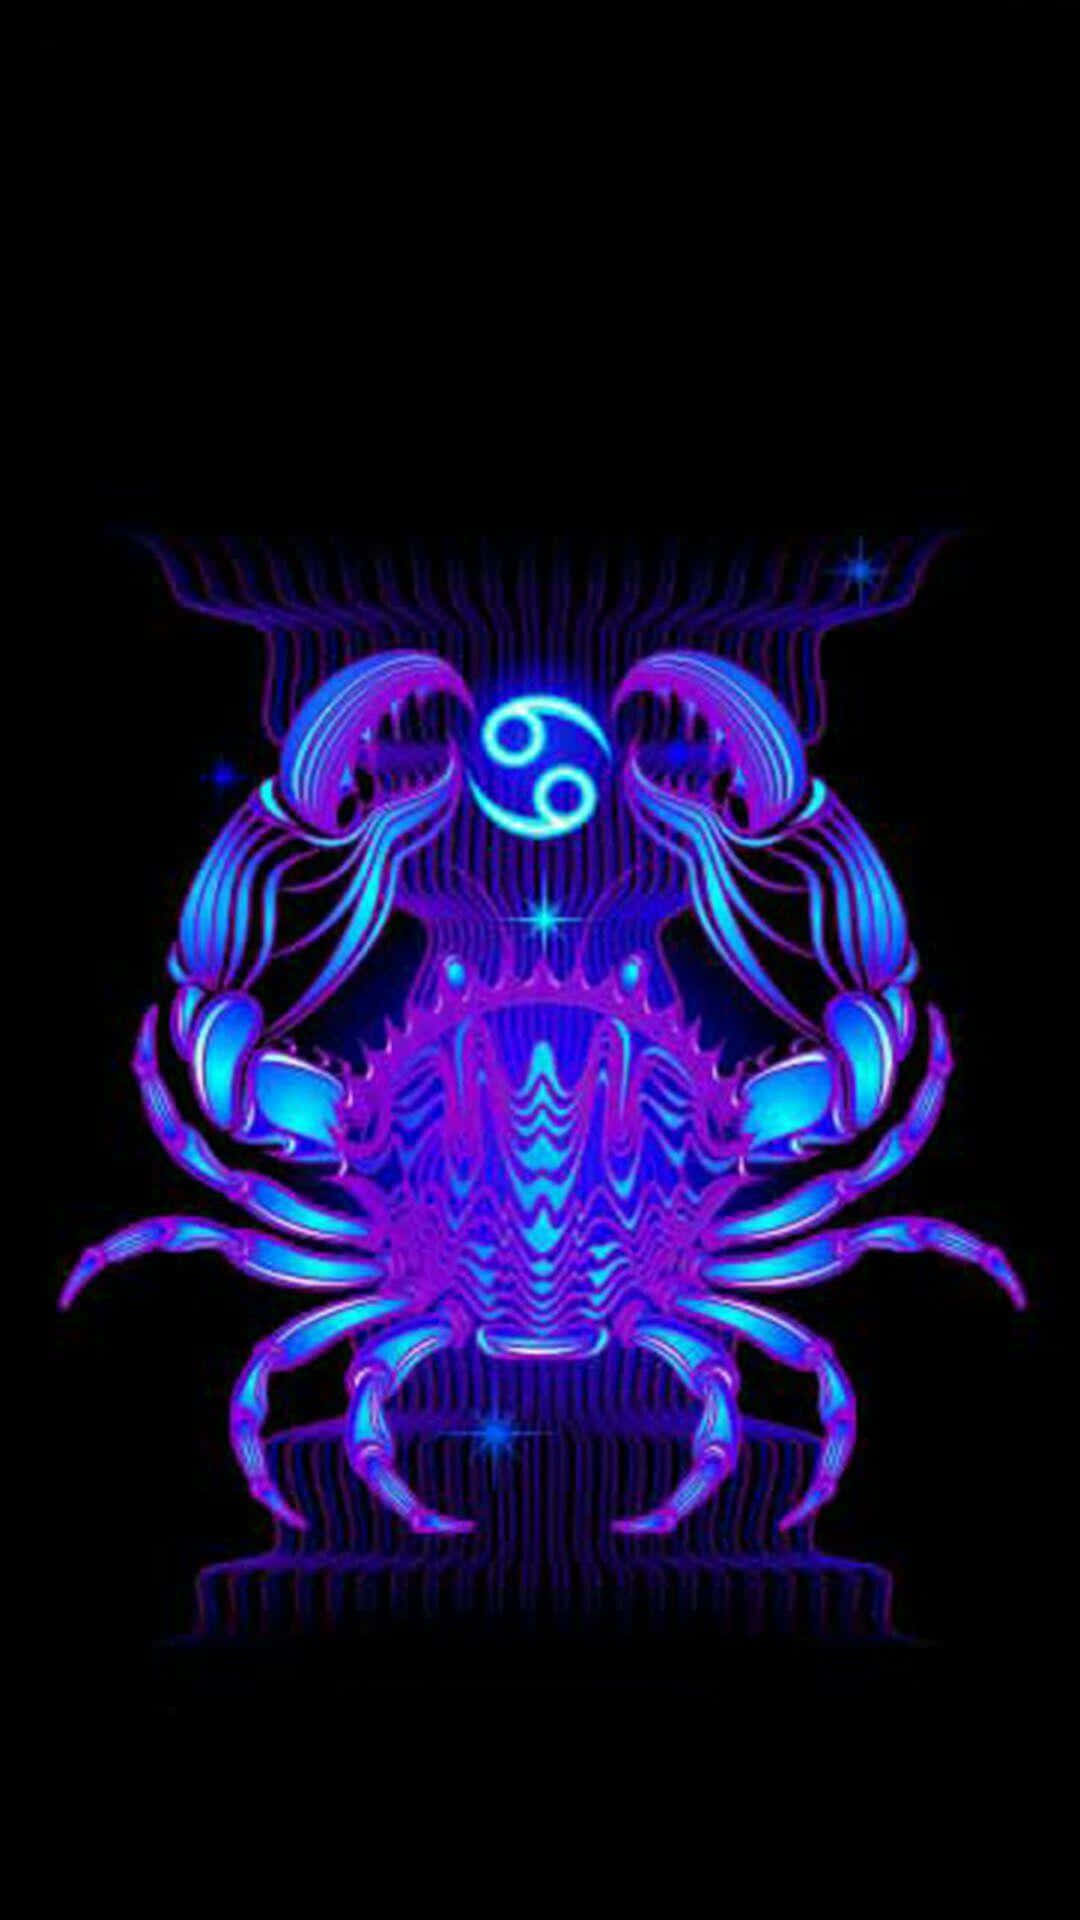 A Blue And Purple Crab On A Black Background